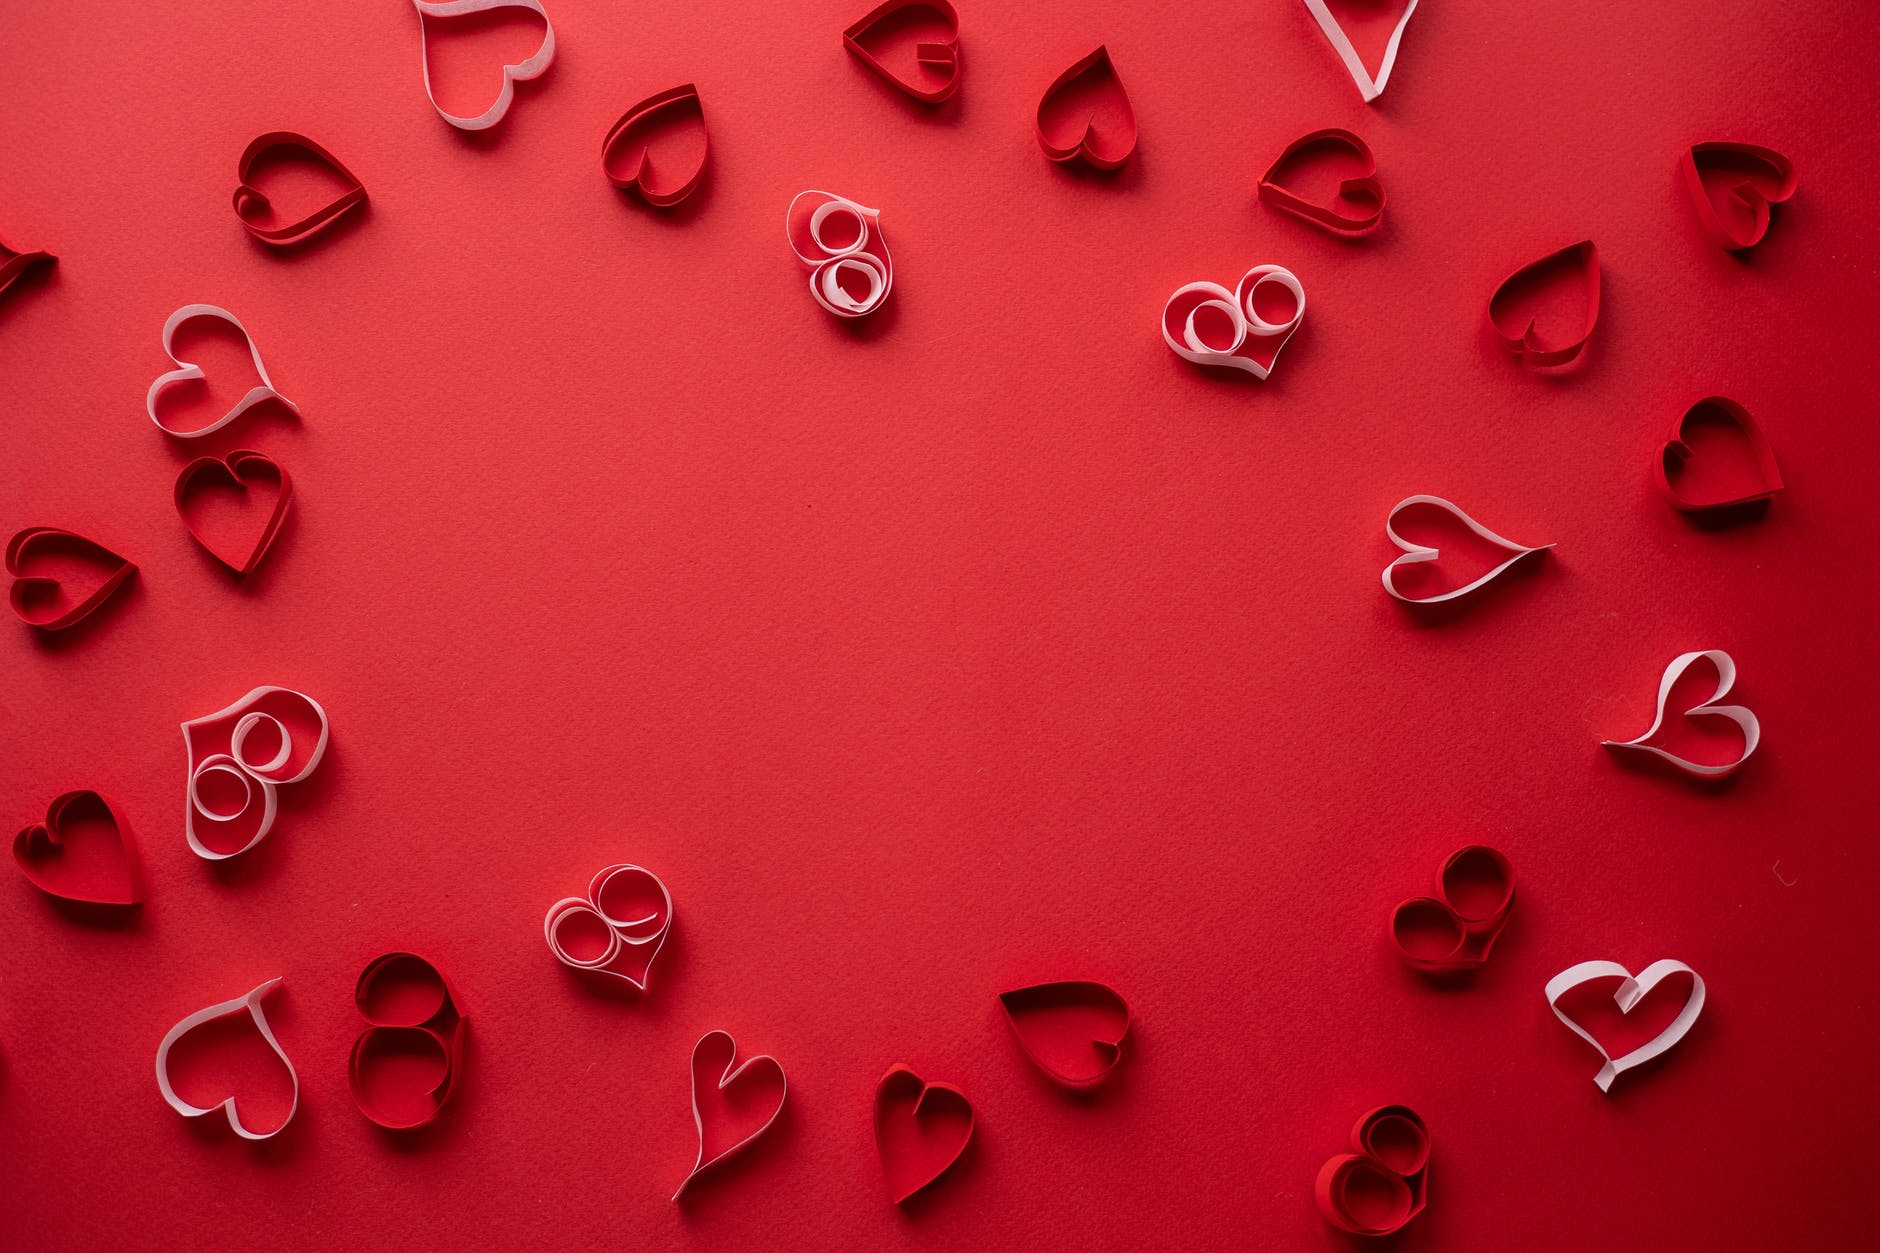 hearts on a red surface